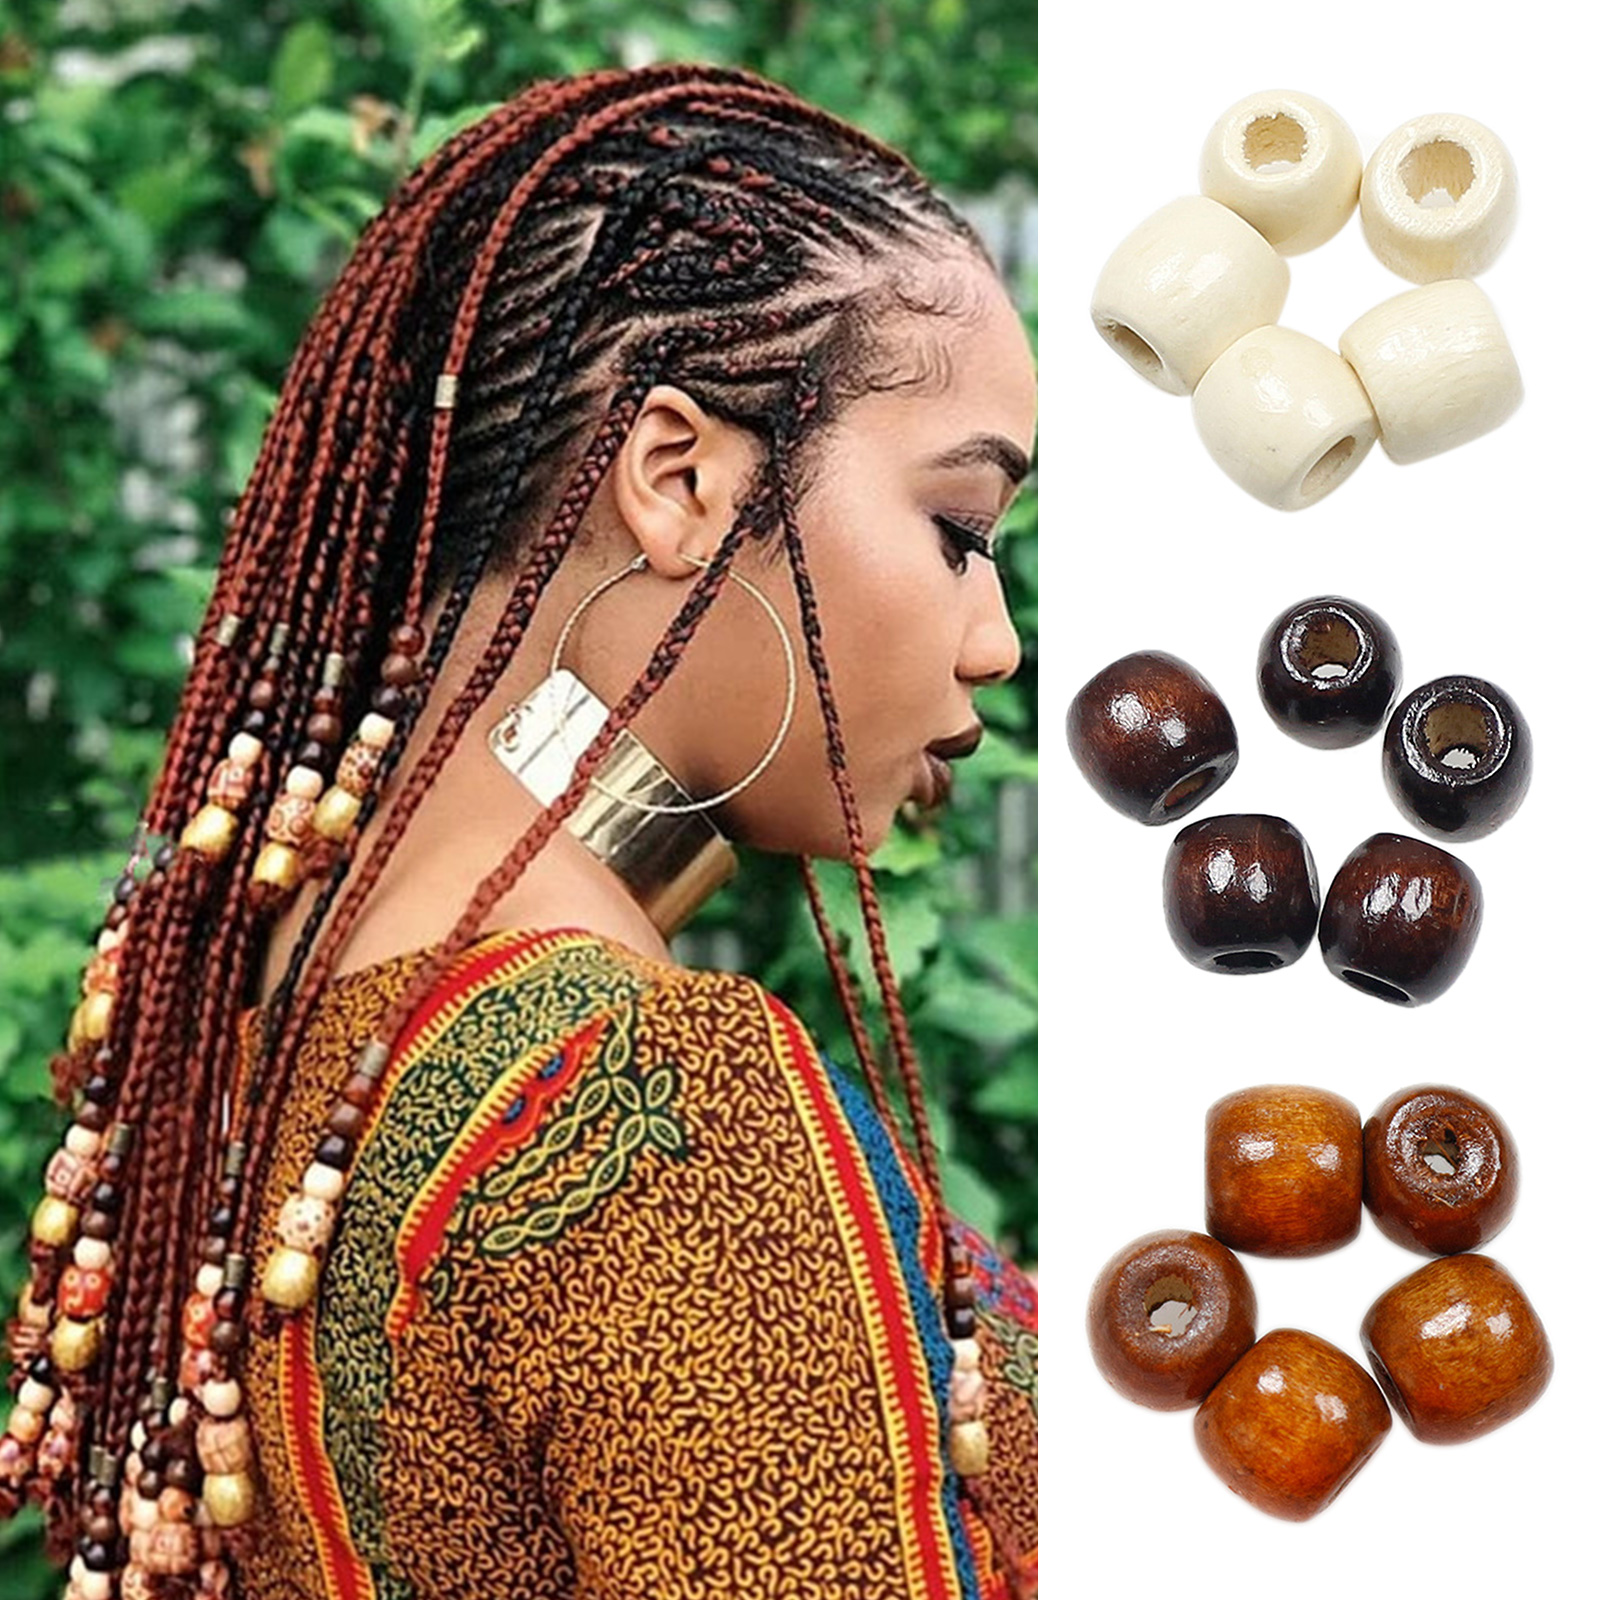 JNANEEI Wooden Beads Mini Beads Hair Accessories for Hair Braid and DIY  Jewelry Making 